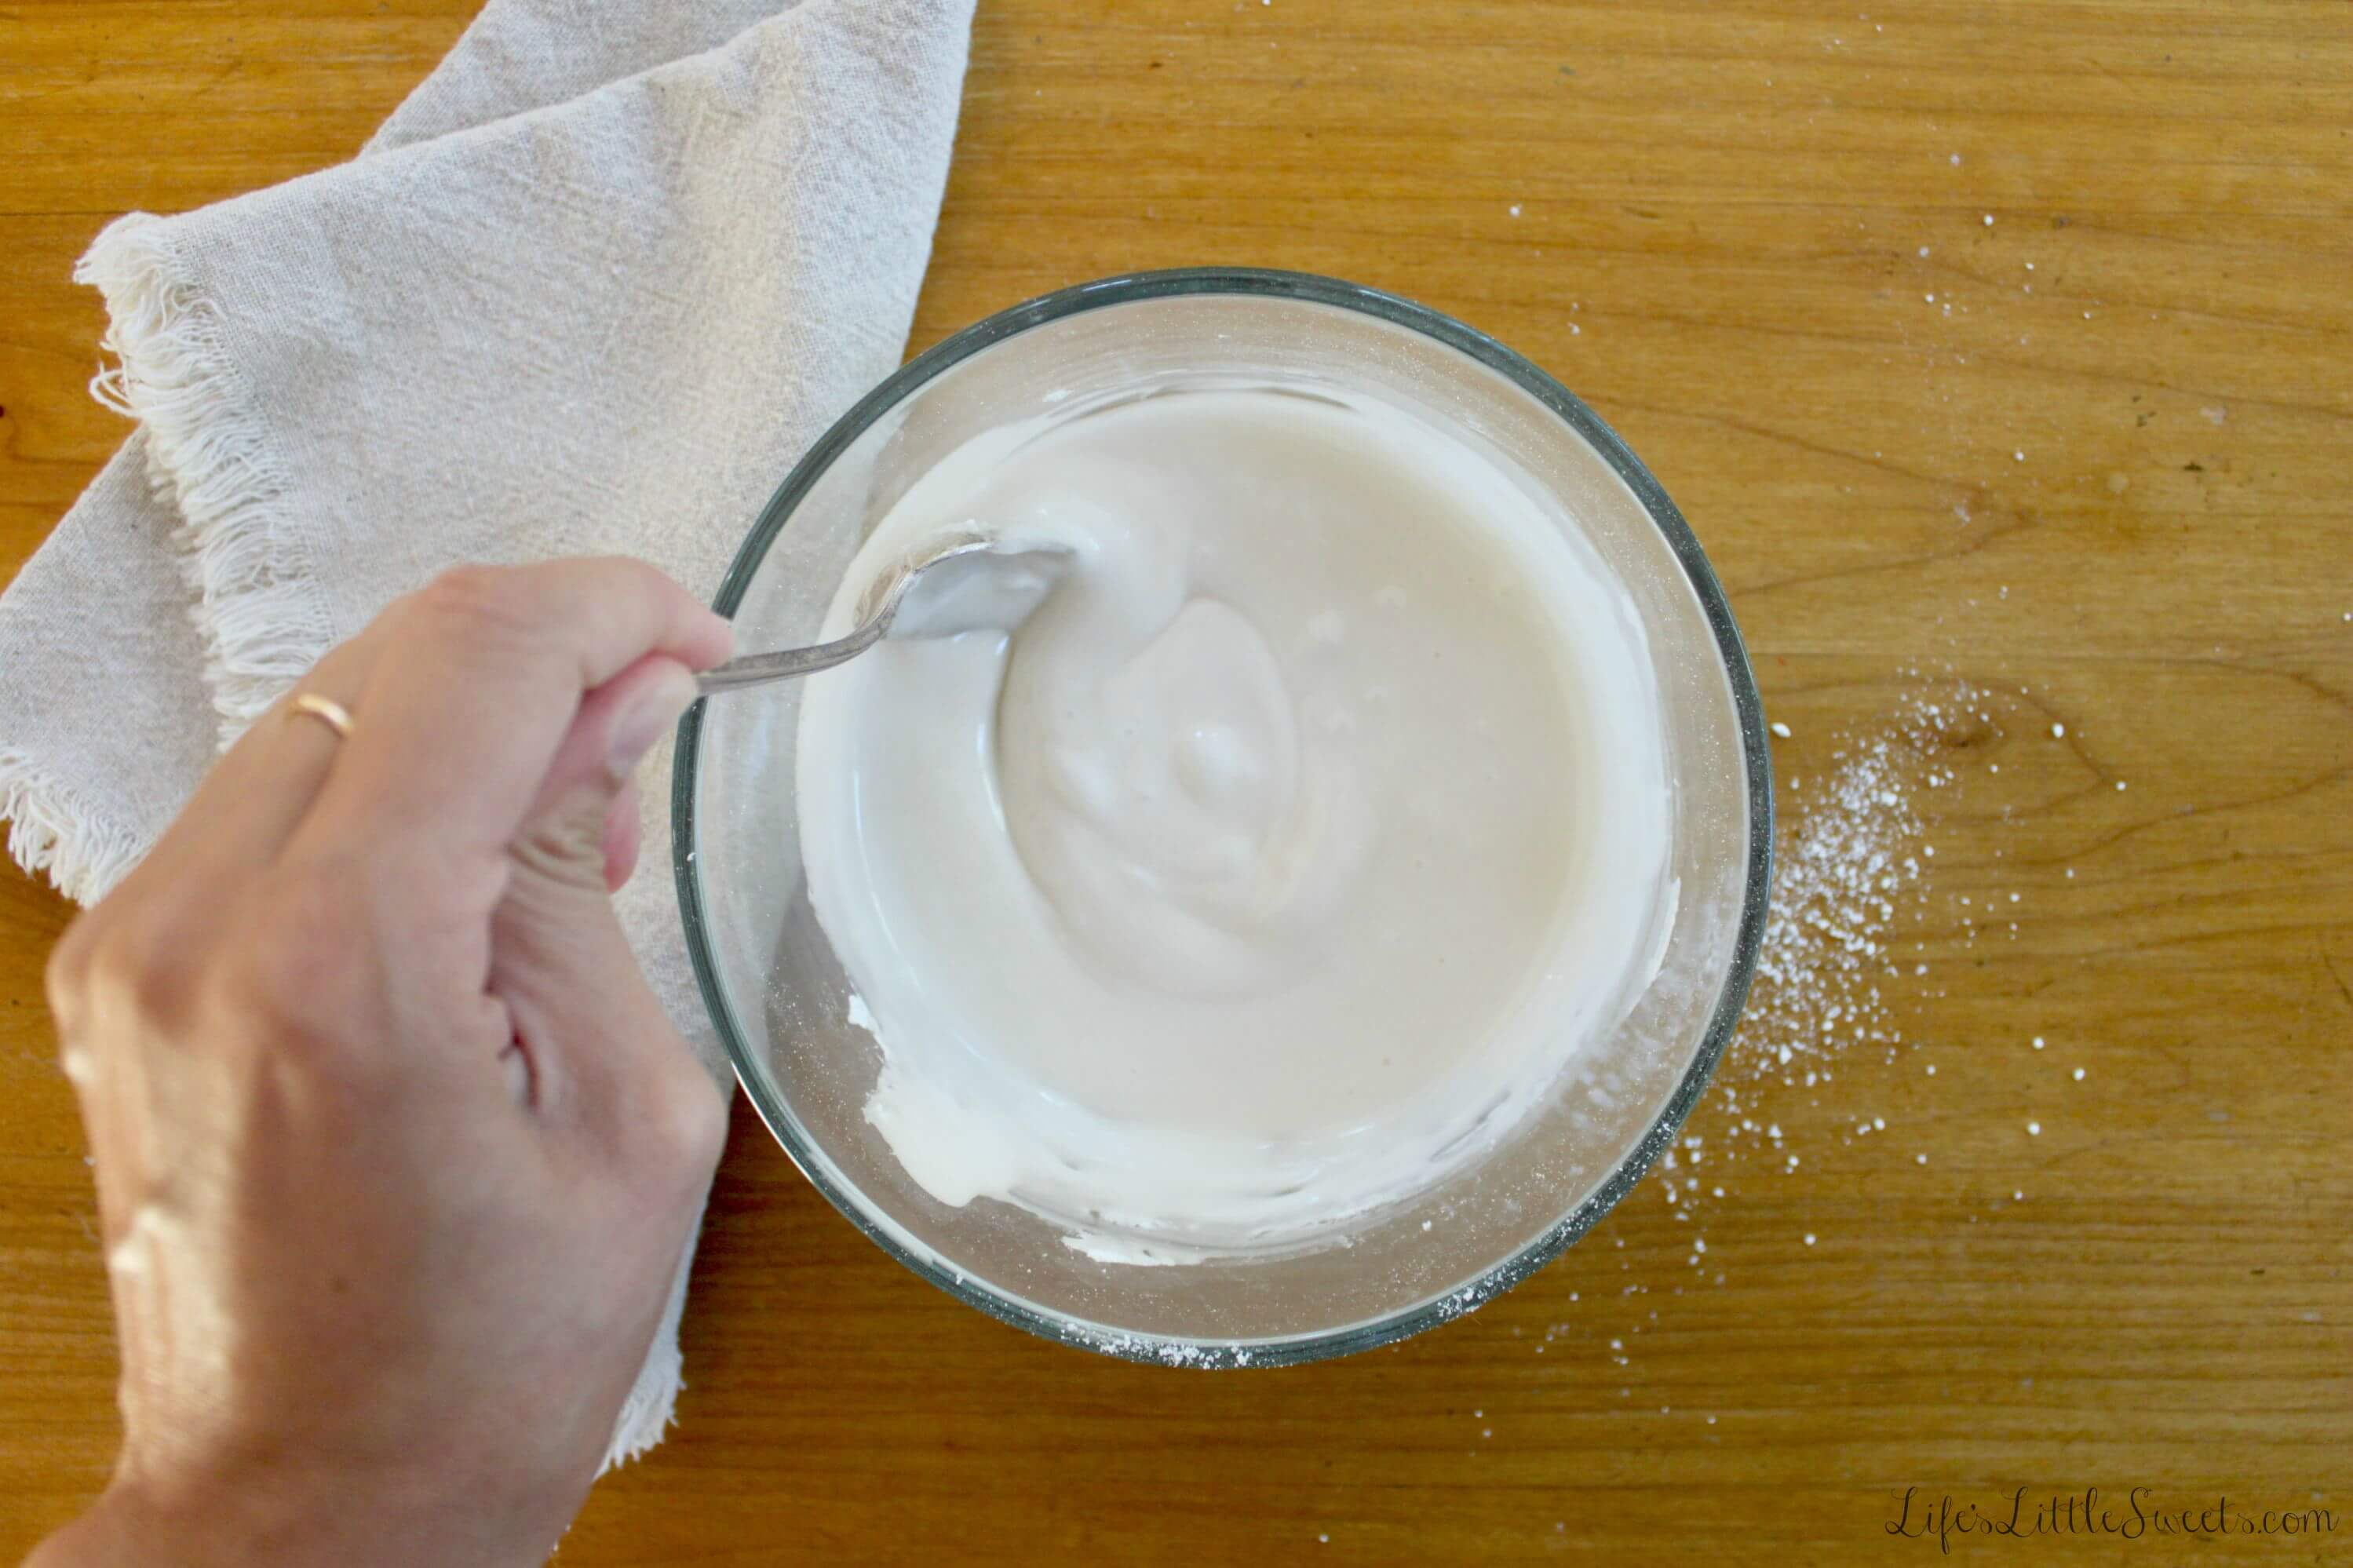 Stir ingredients to combine until smooth. Vanilla Coconut Icing is a vegan and gluten-free icing that can be enjoyed on muffins, scones, quick breads, cakes or any number of dessert recipes.